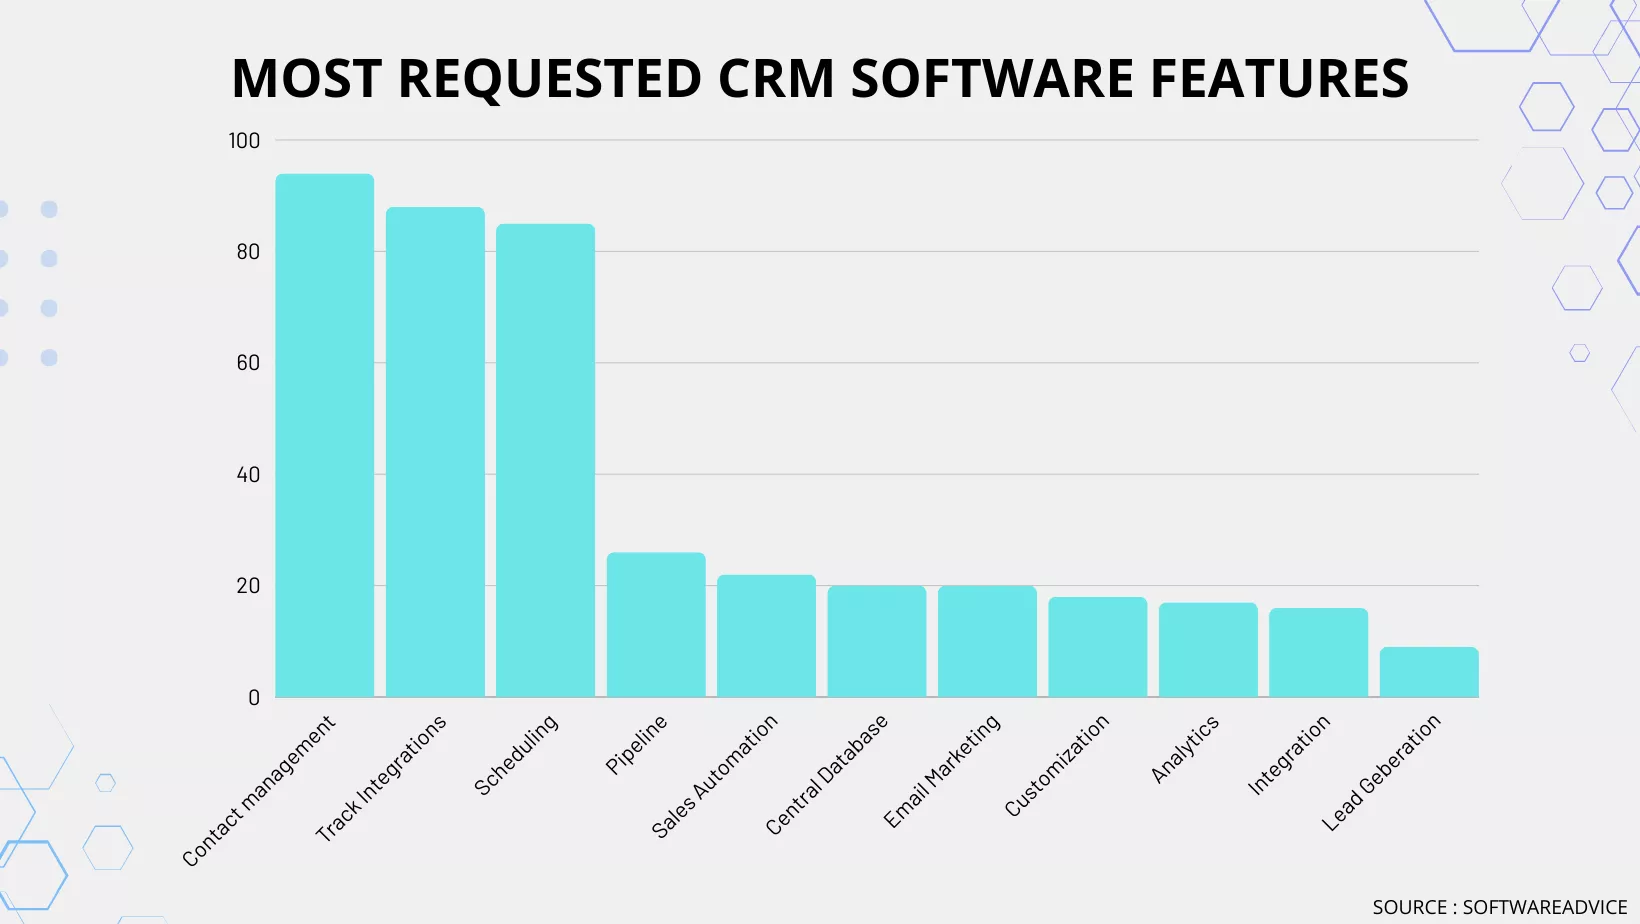 Most Requested CRM Software Features